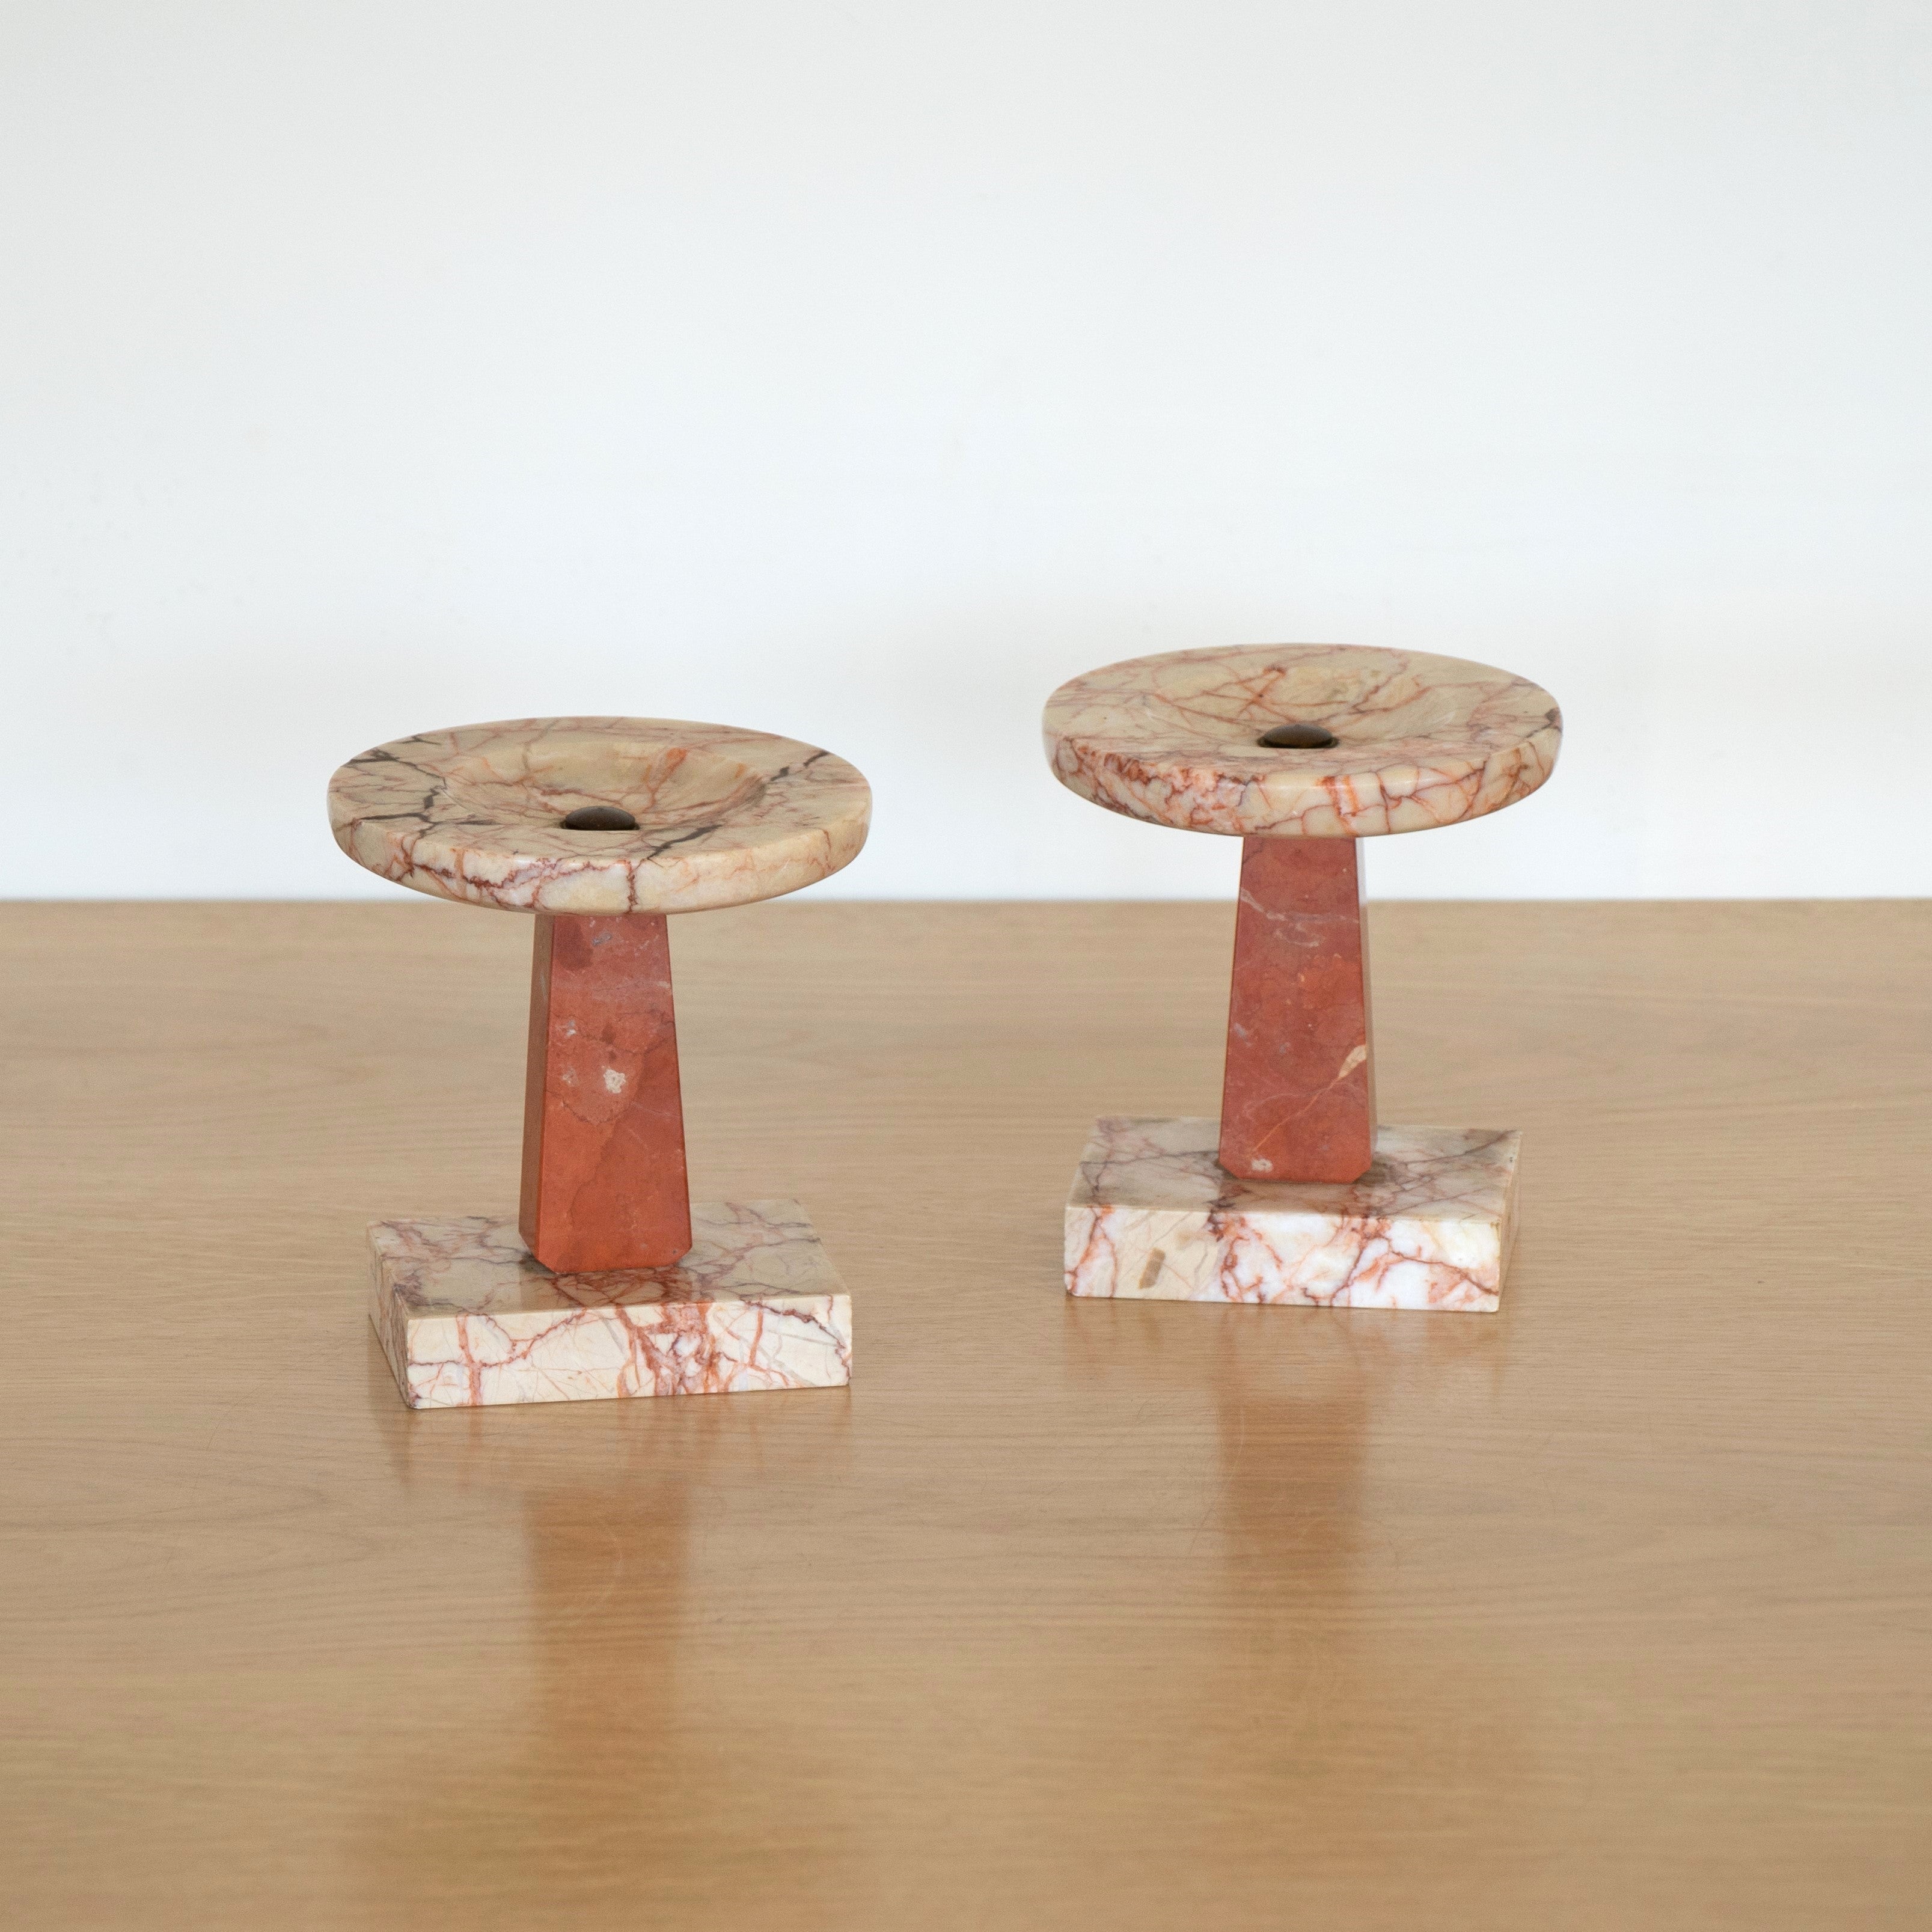 Wonderful pair of marble objects from France. Pale pink top and base with a coral stem. Perfect as bookends, candle rests, or decorative objects. 

Measures 5